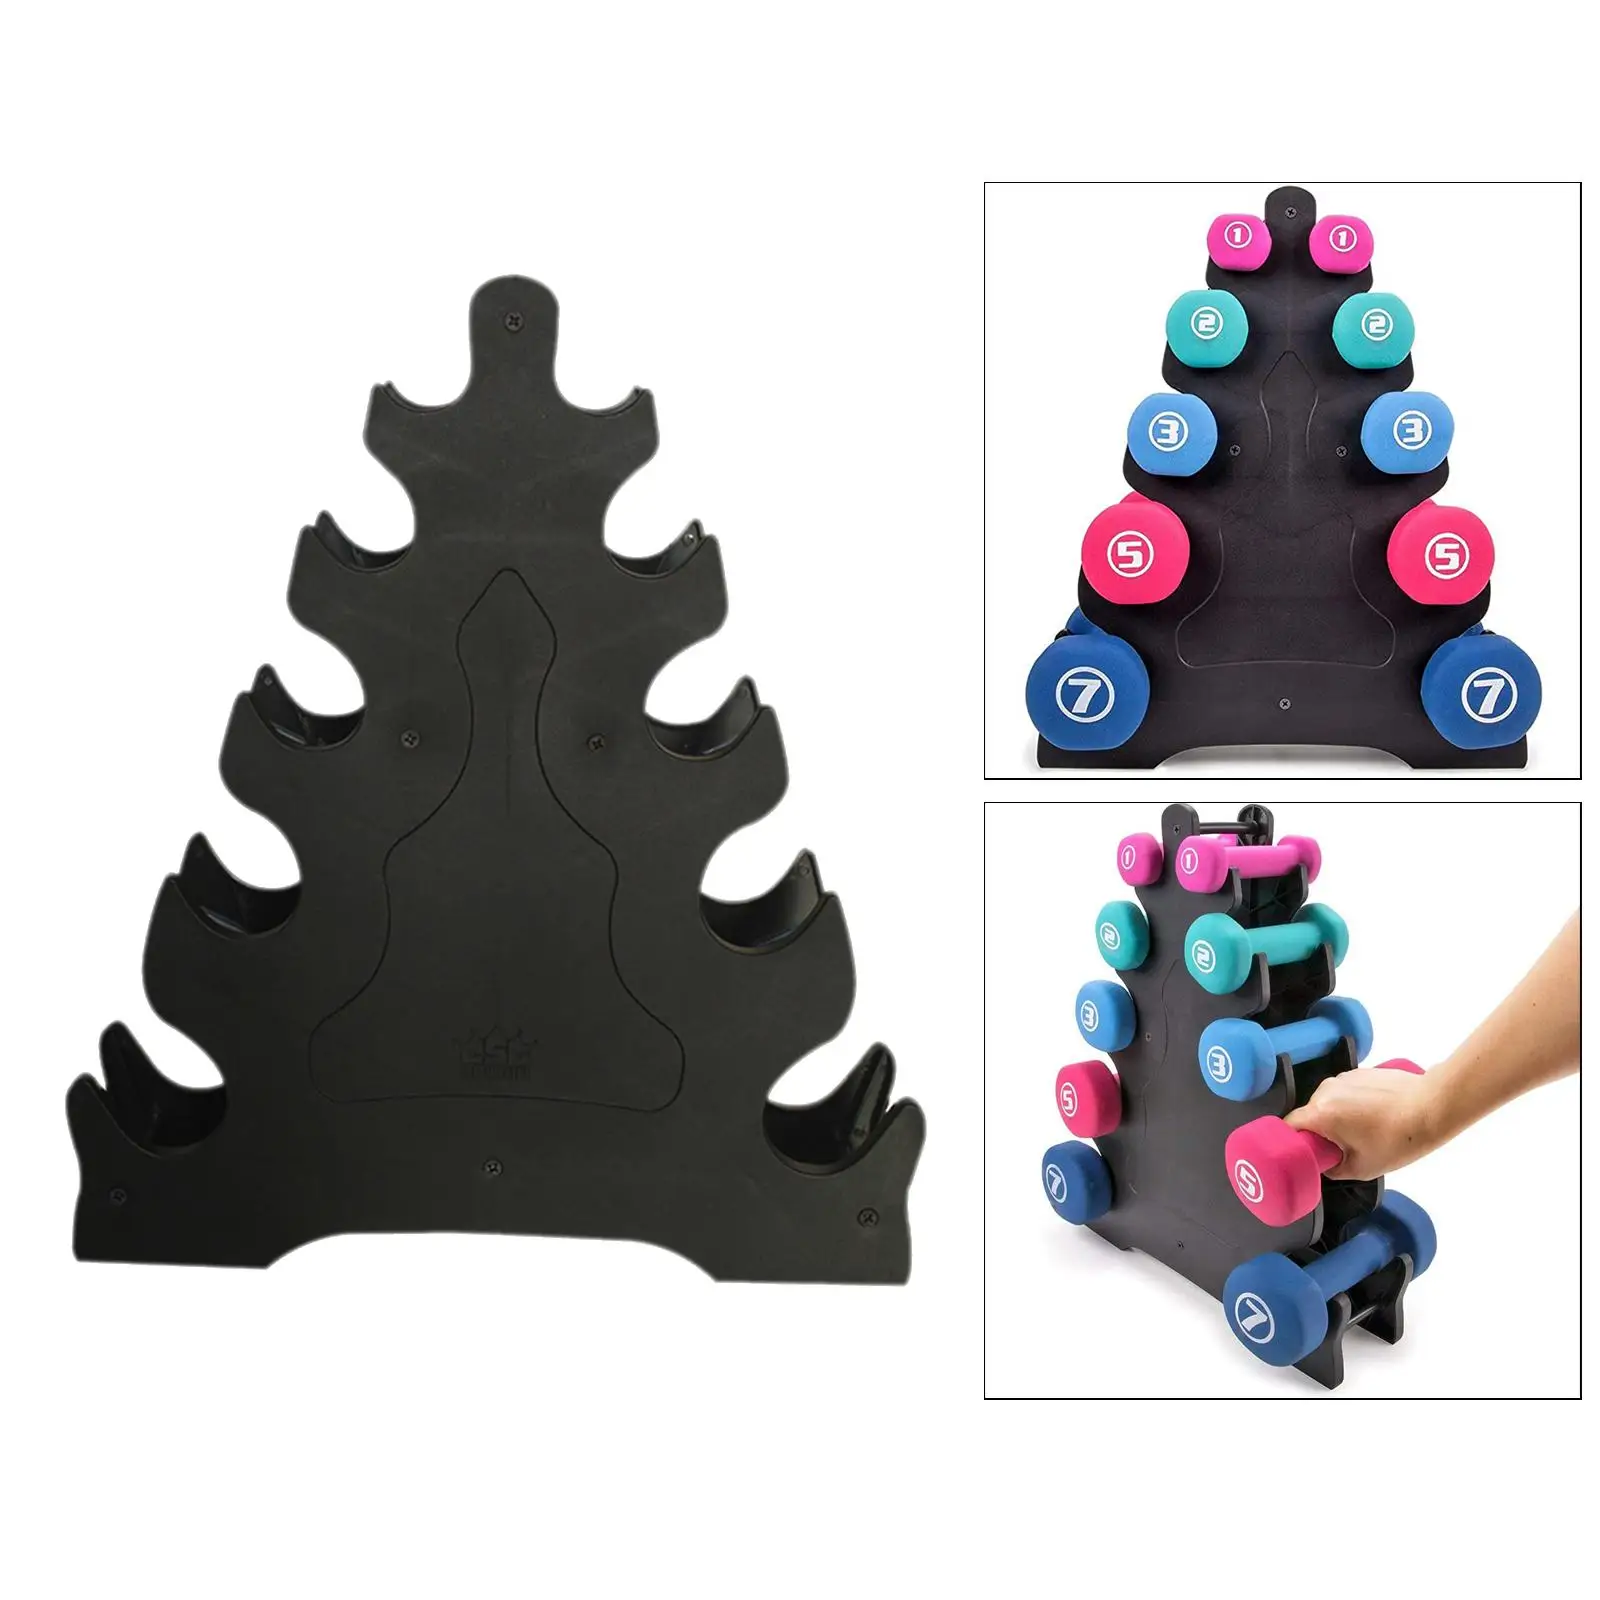 5-Tier New Weight Lifting Dumbbell Dumbbell Floor Bracket Home Exercise Equipment Rack Stands Weightlifting Holder